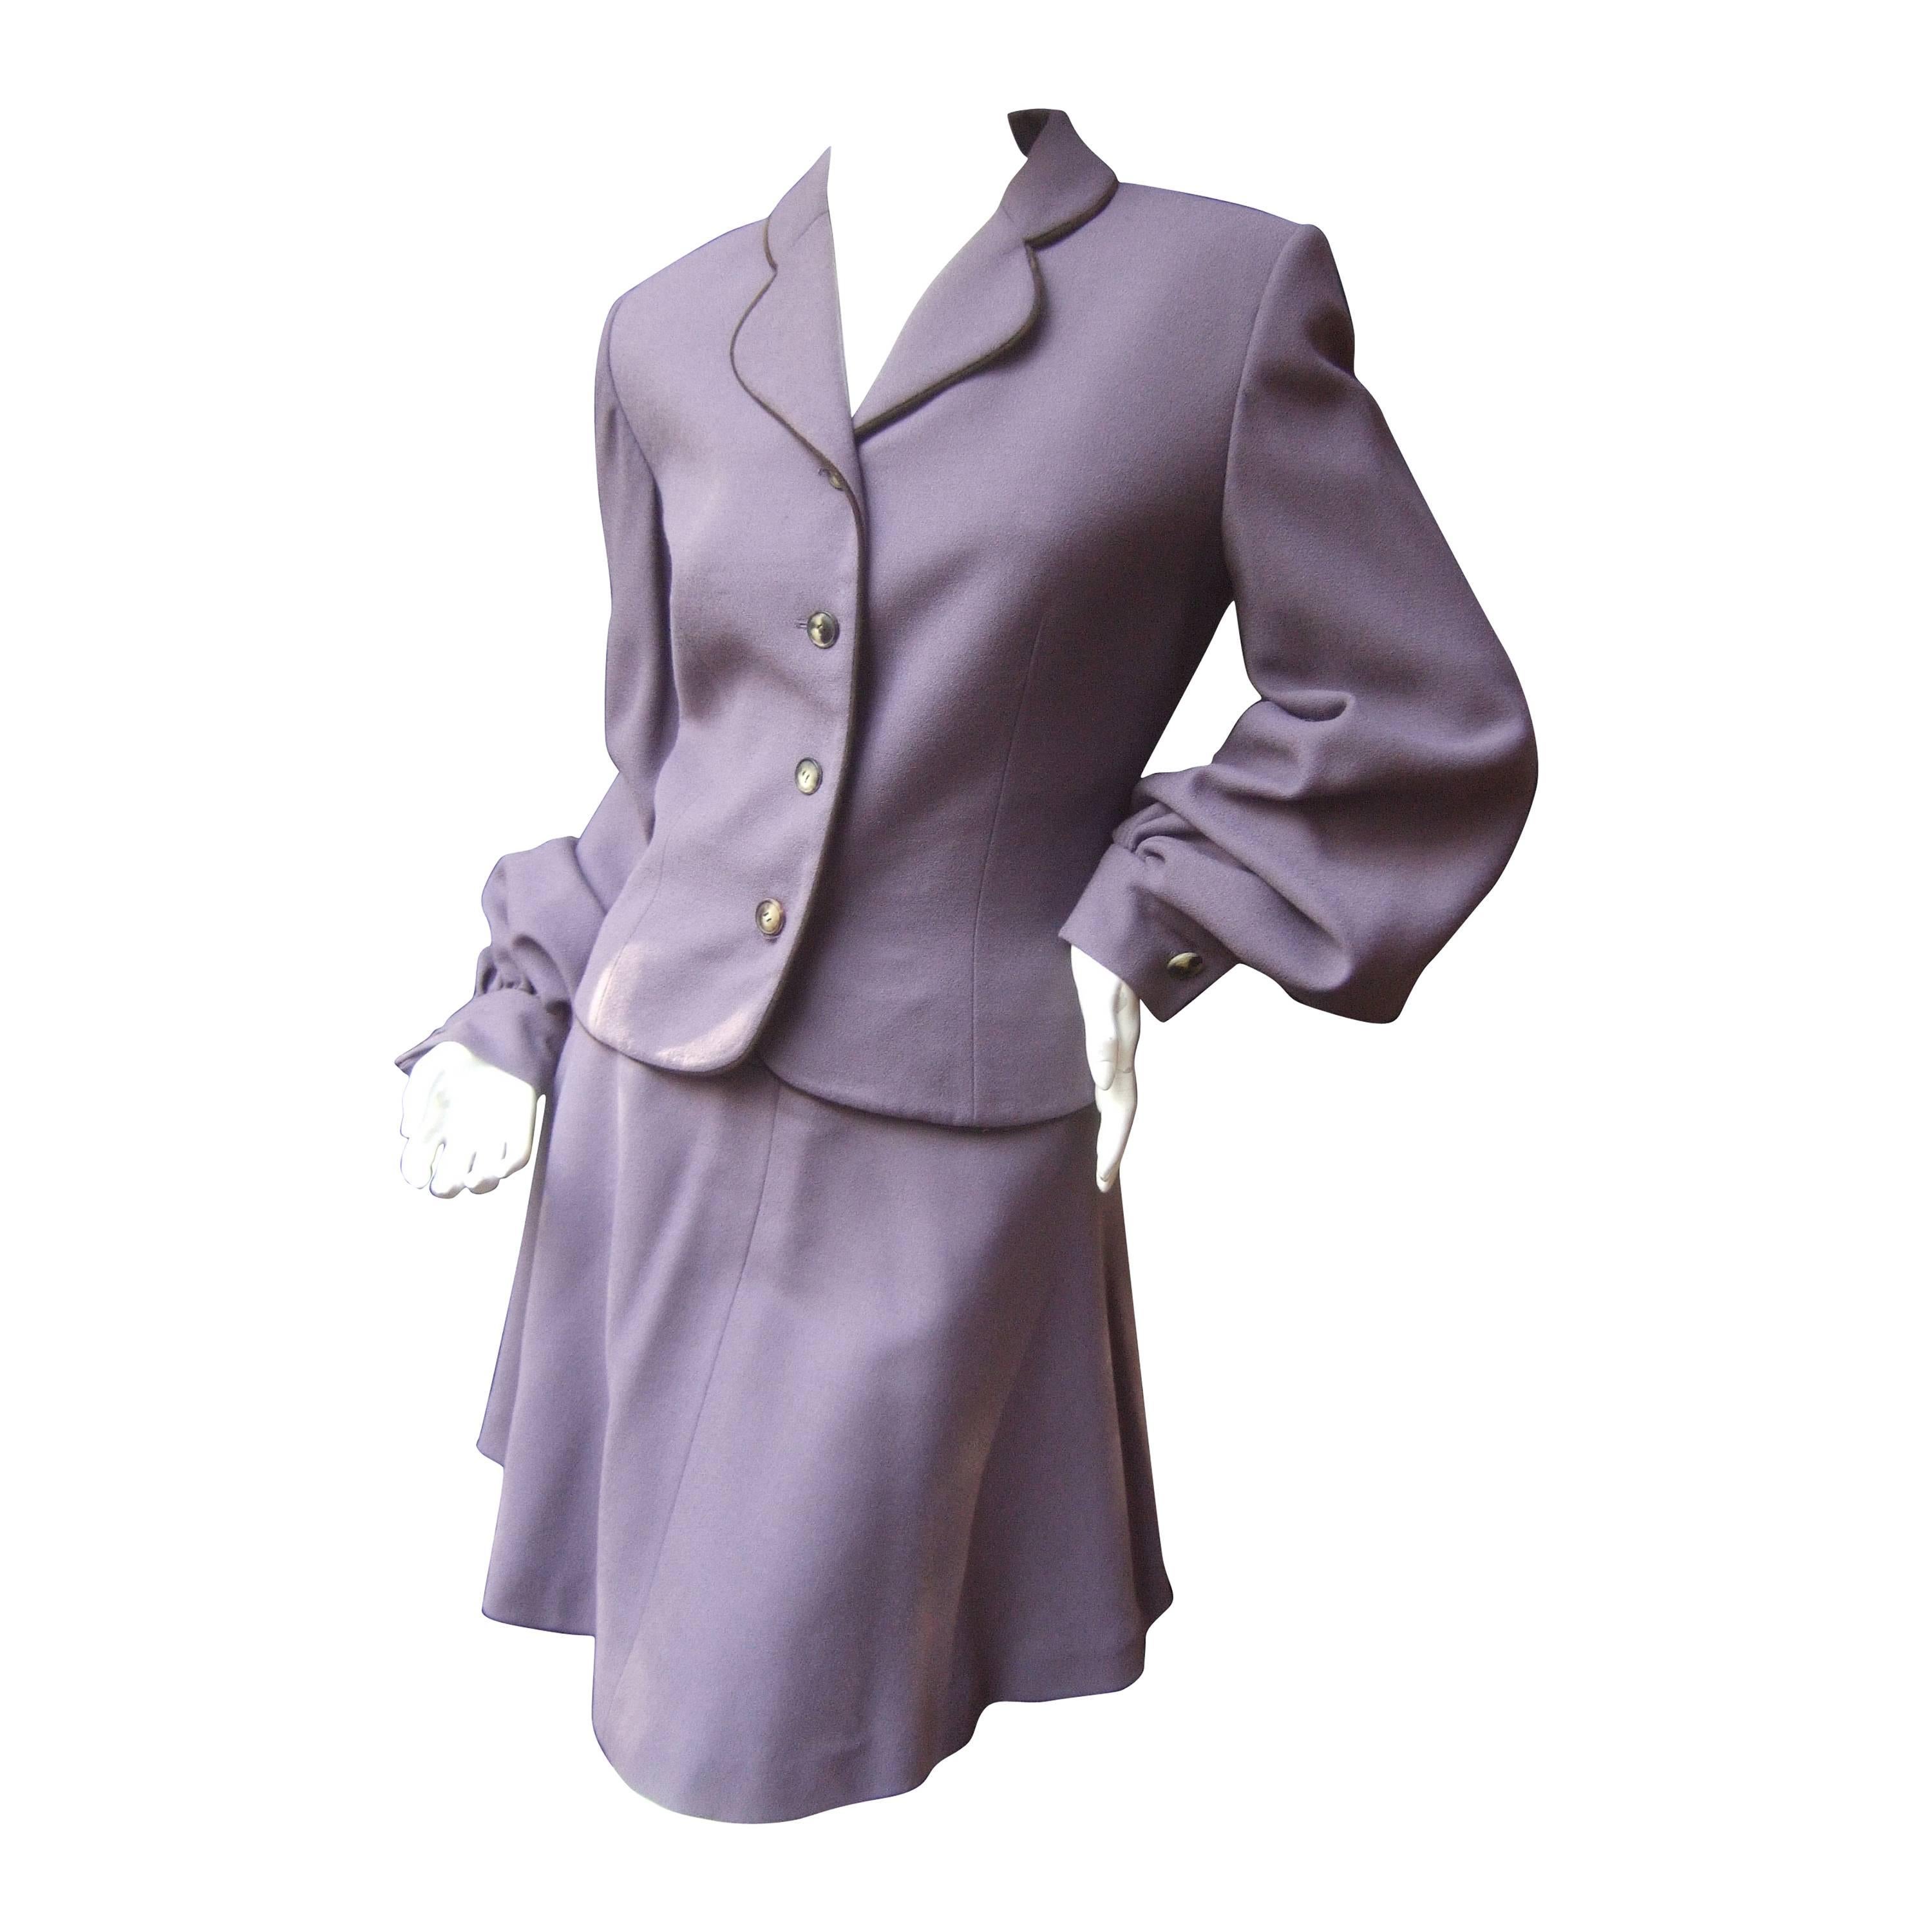 Givenchy Couture Lavender Wool Skirt Suit c 1990